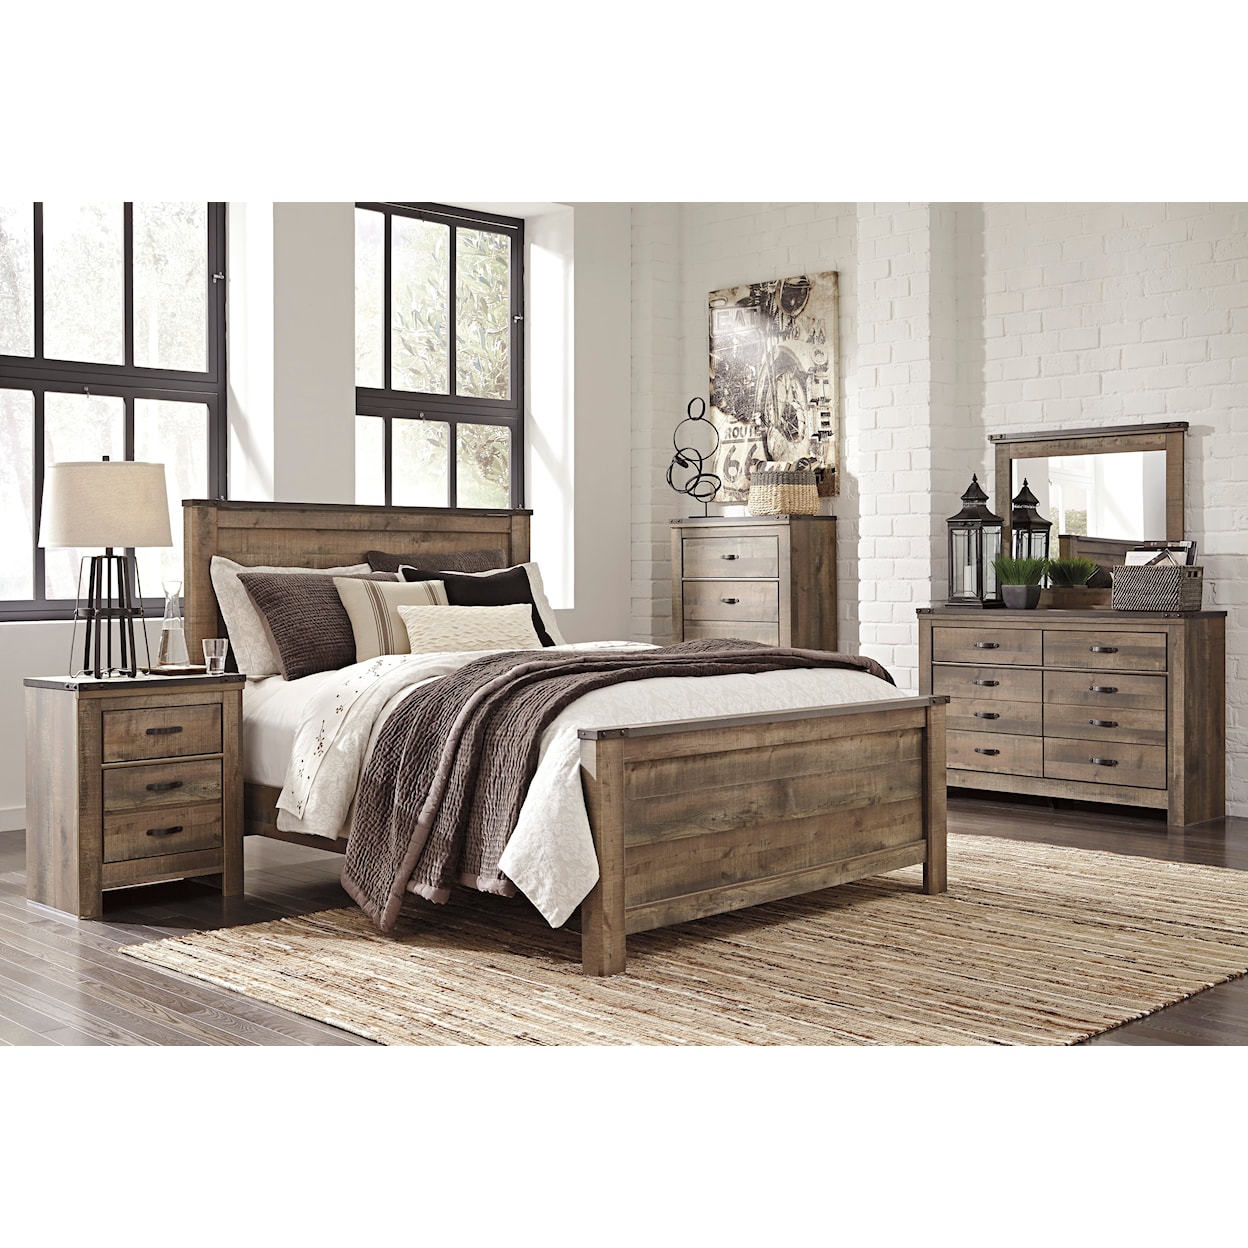 Ashley Furniture Signature Design Trinell 4-Piece Bedroom Group